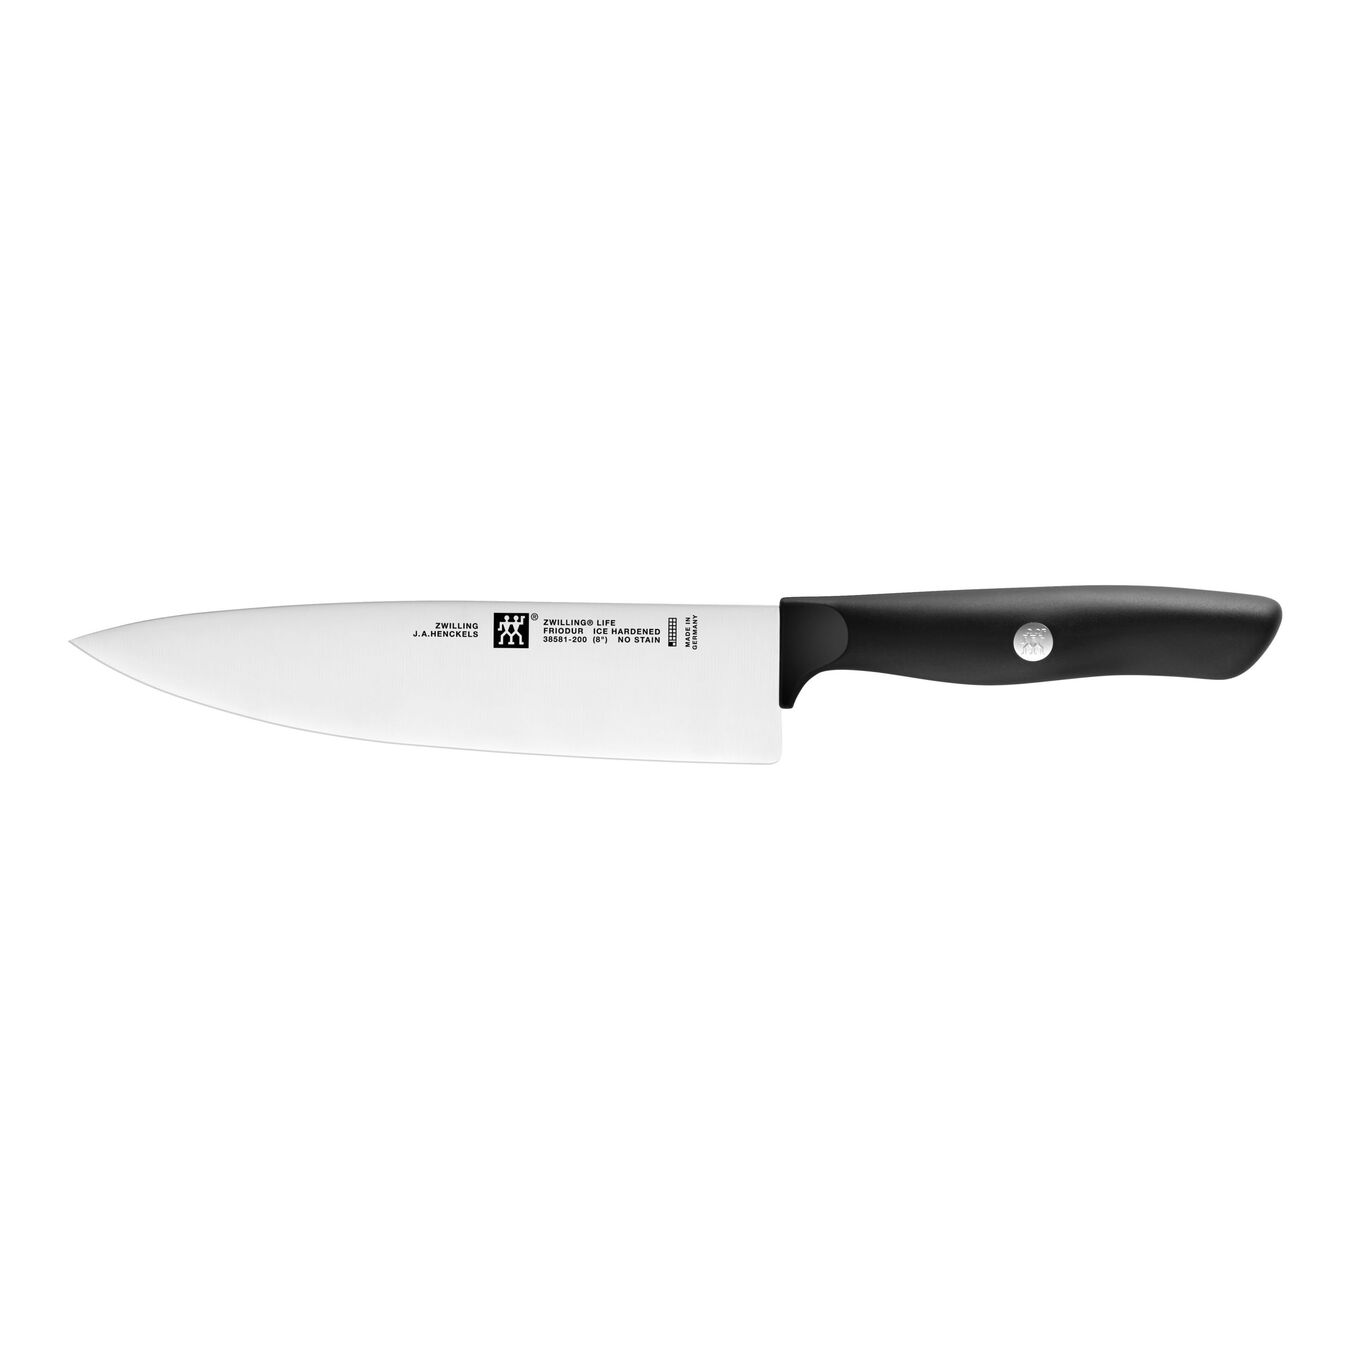 8-inch, Chef's knife - Visual Imperfections,,large 1